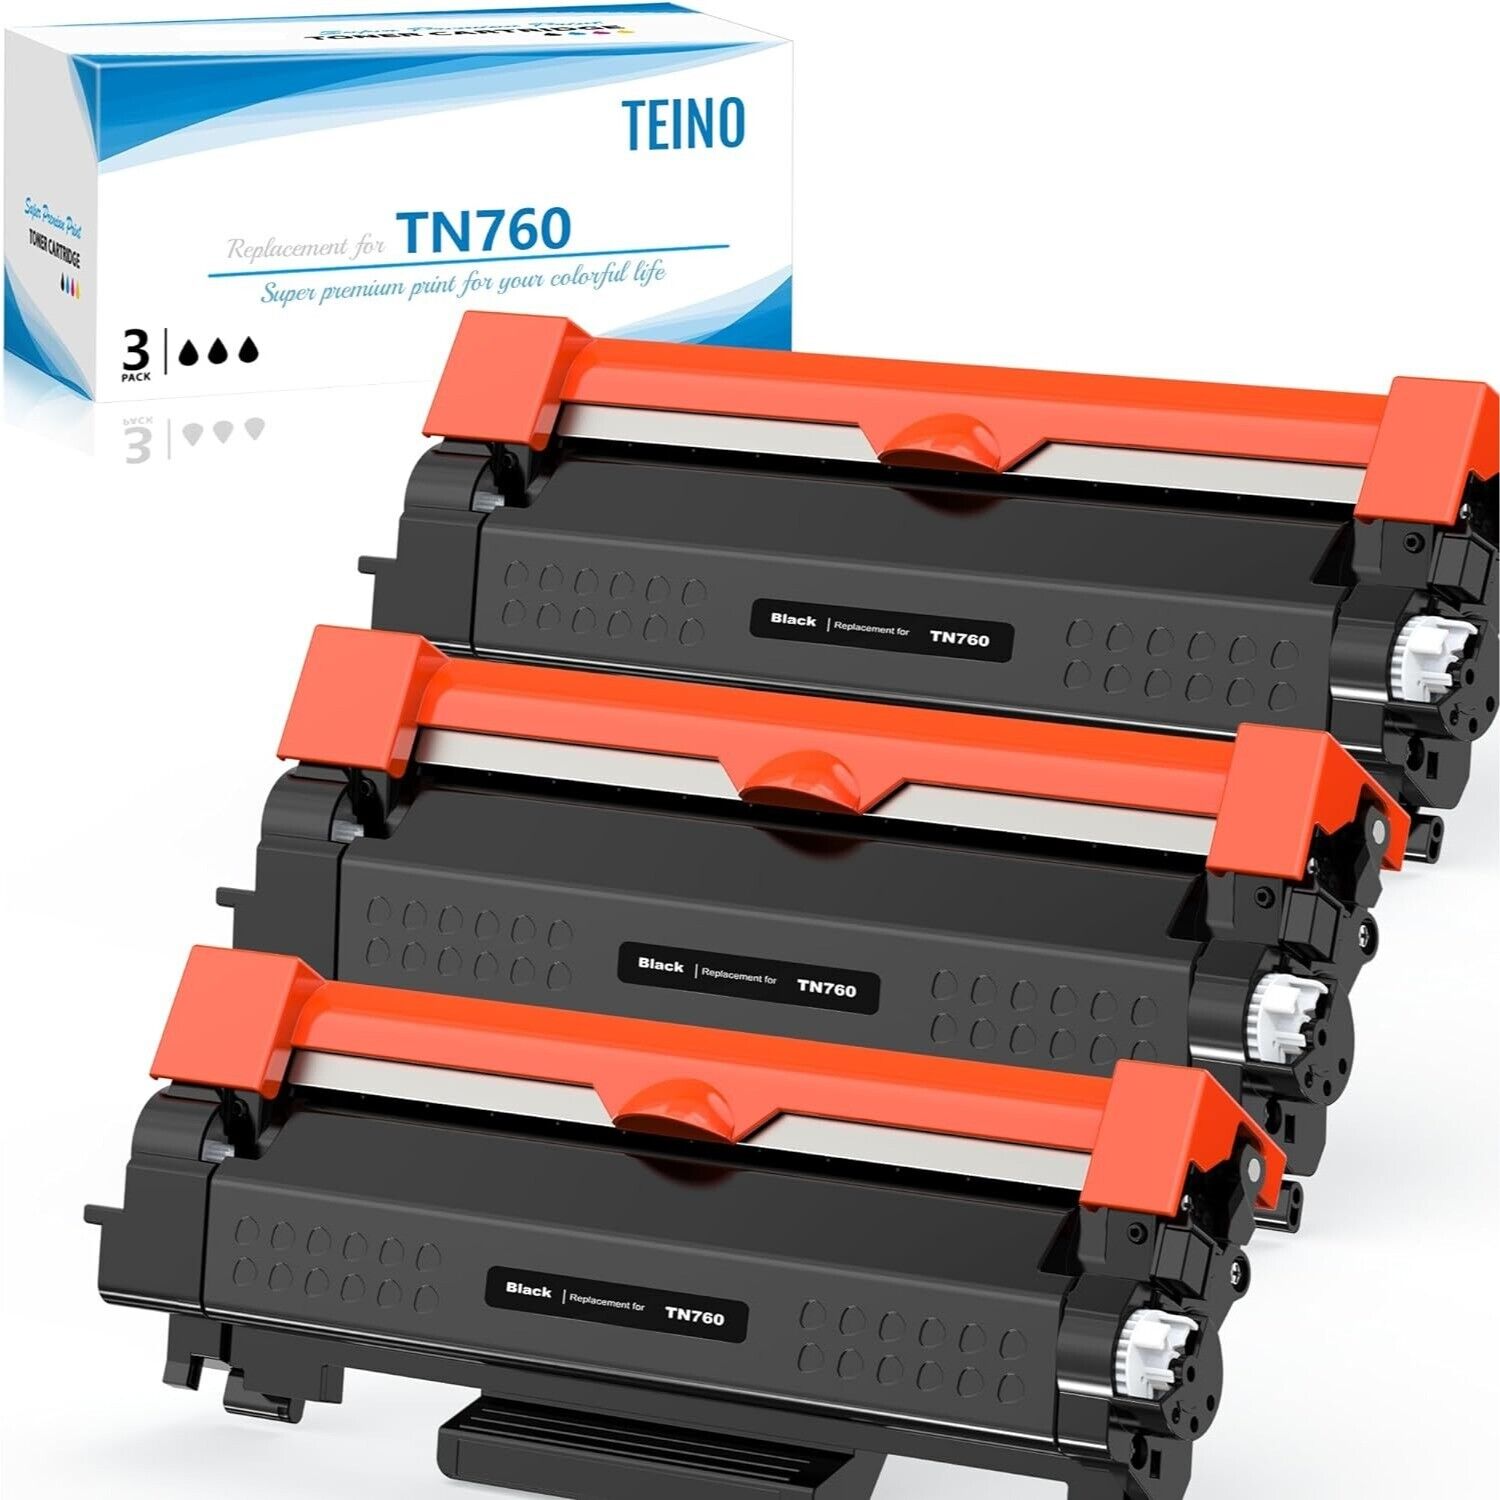 TN760 TN750 Replacement Toner Cartridges 3 PACK High Yield Black MFC DCP Series